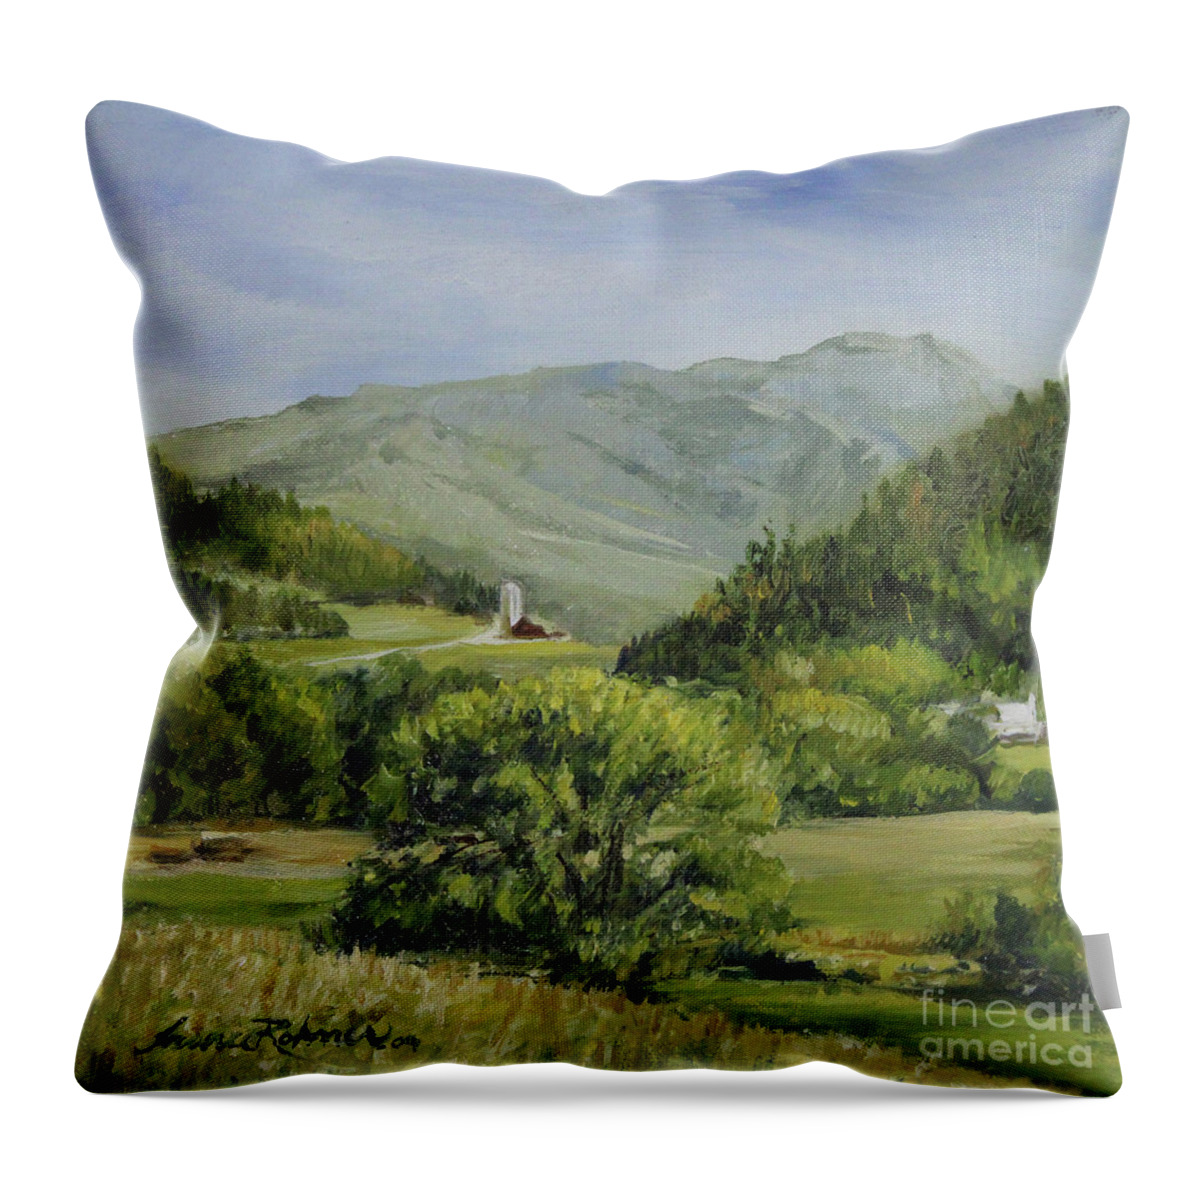 Pastures Throw Pillow featuring the painting Pastures Below Mt. Mansfield. by Laurie Rohner